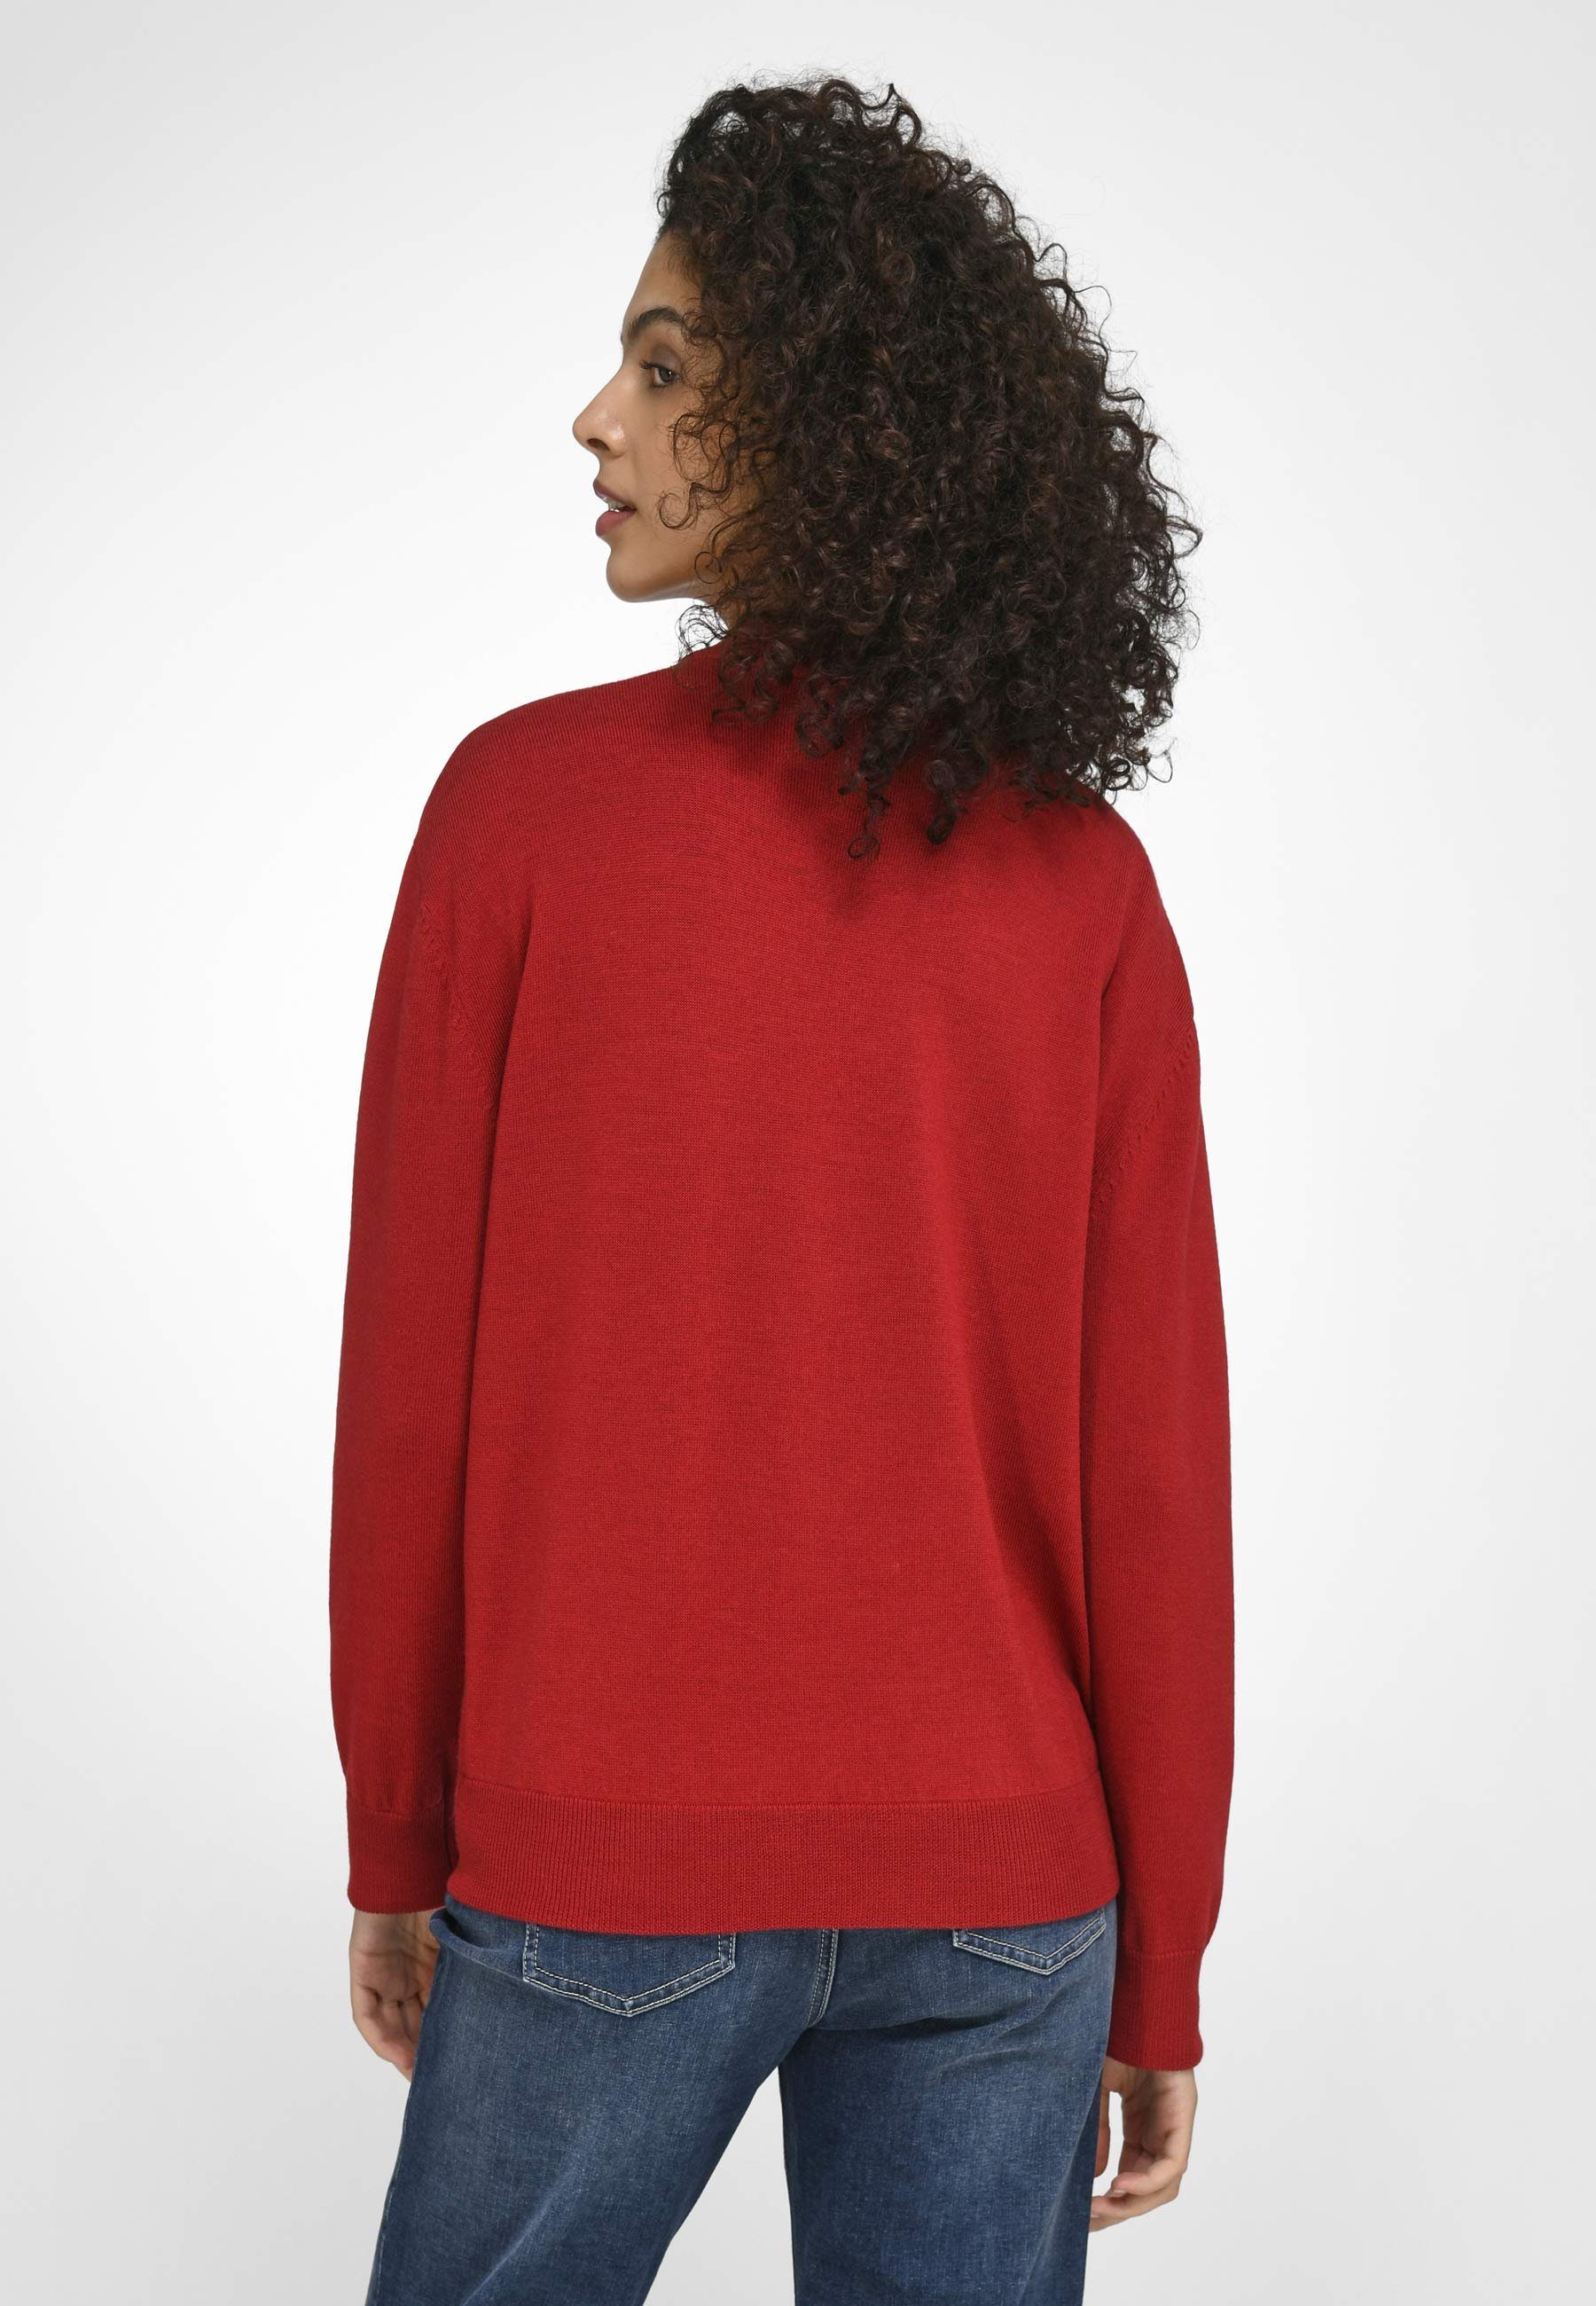 ROT new Peter Strickpullover Hahn wool